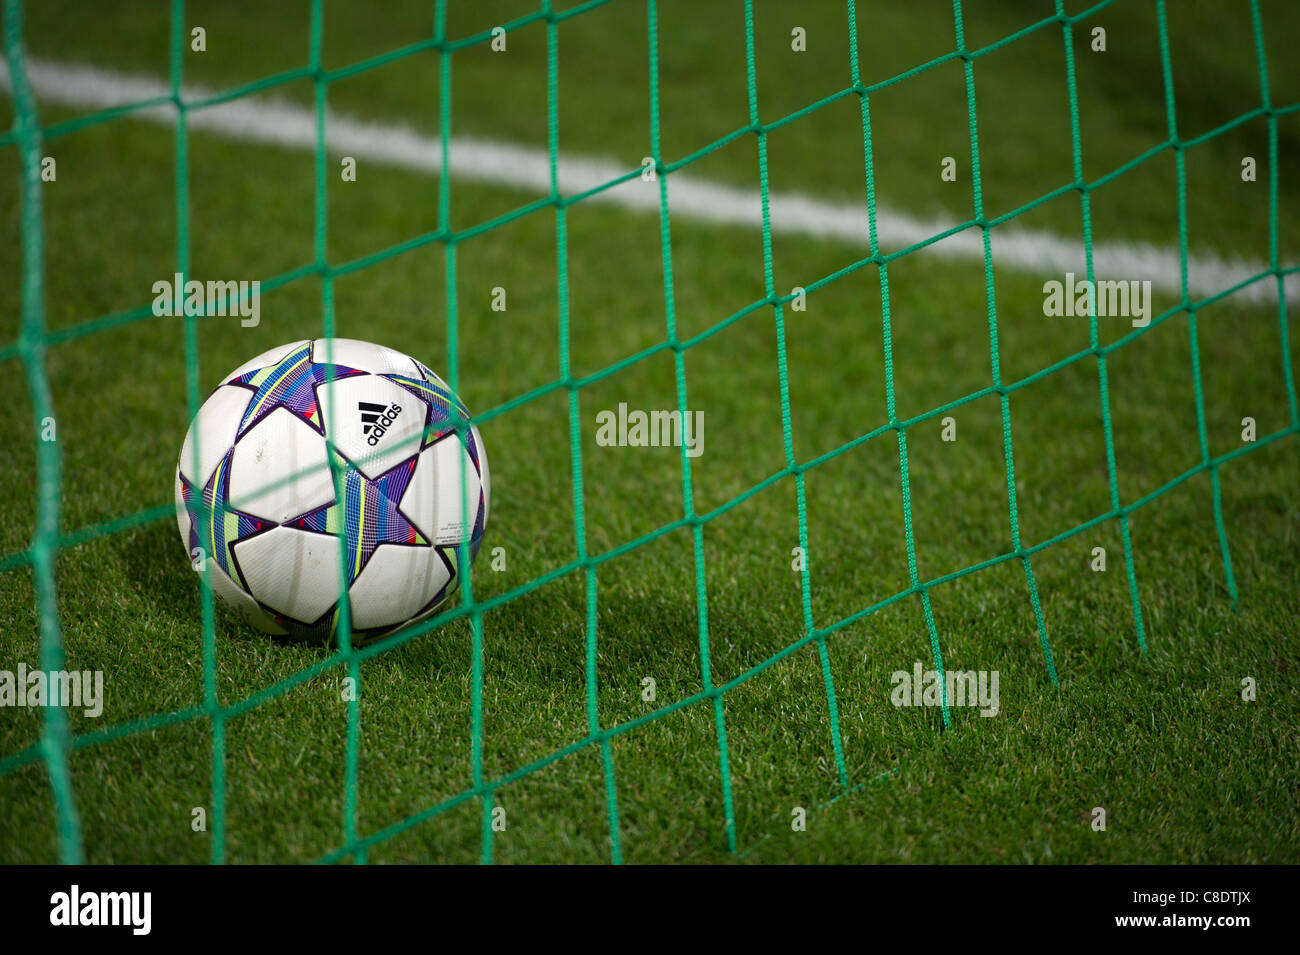 Adidas Champions League ball in the goal net and over the white line Stock Photo